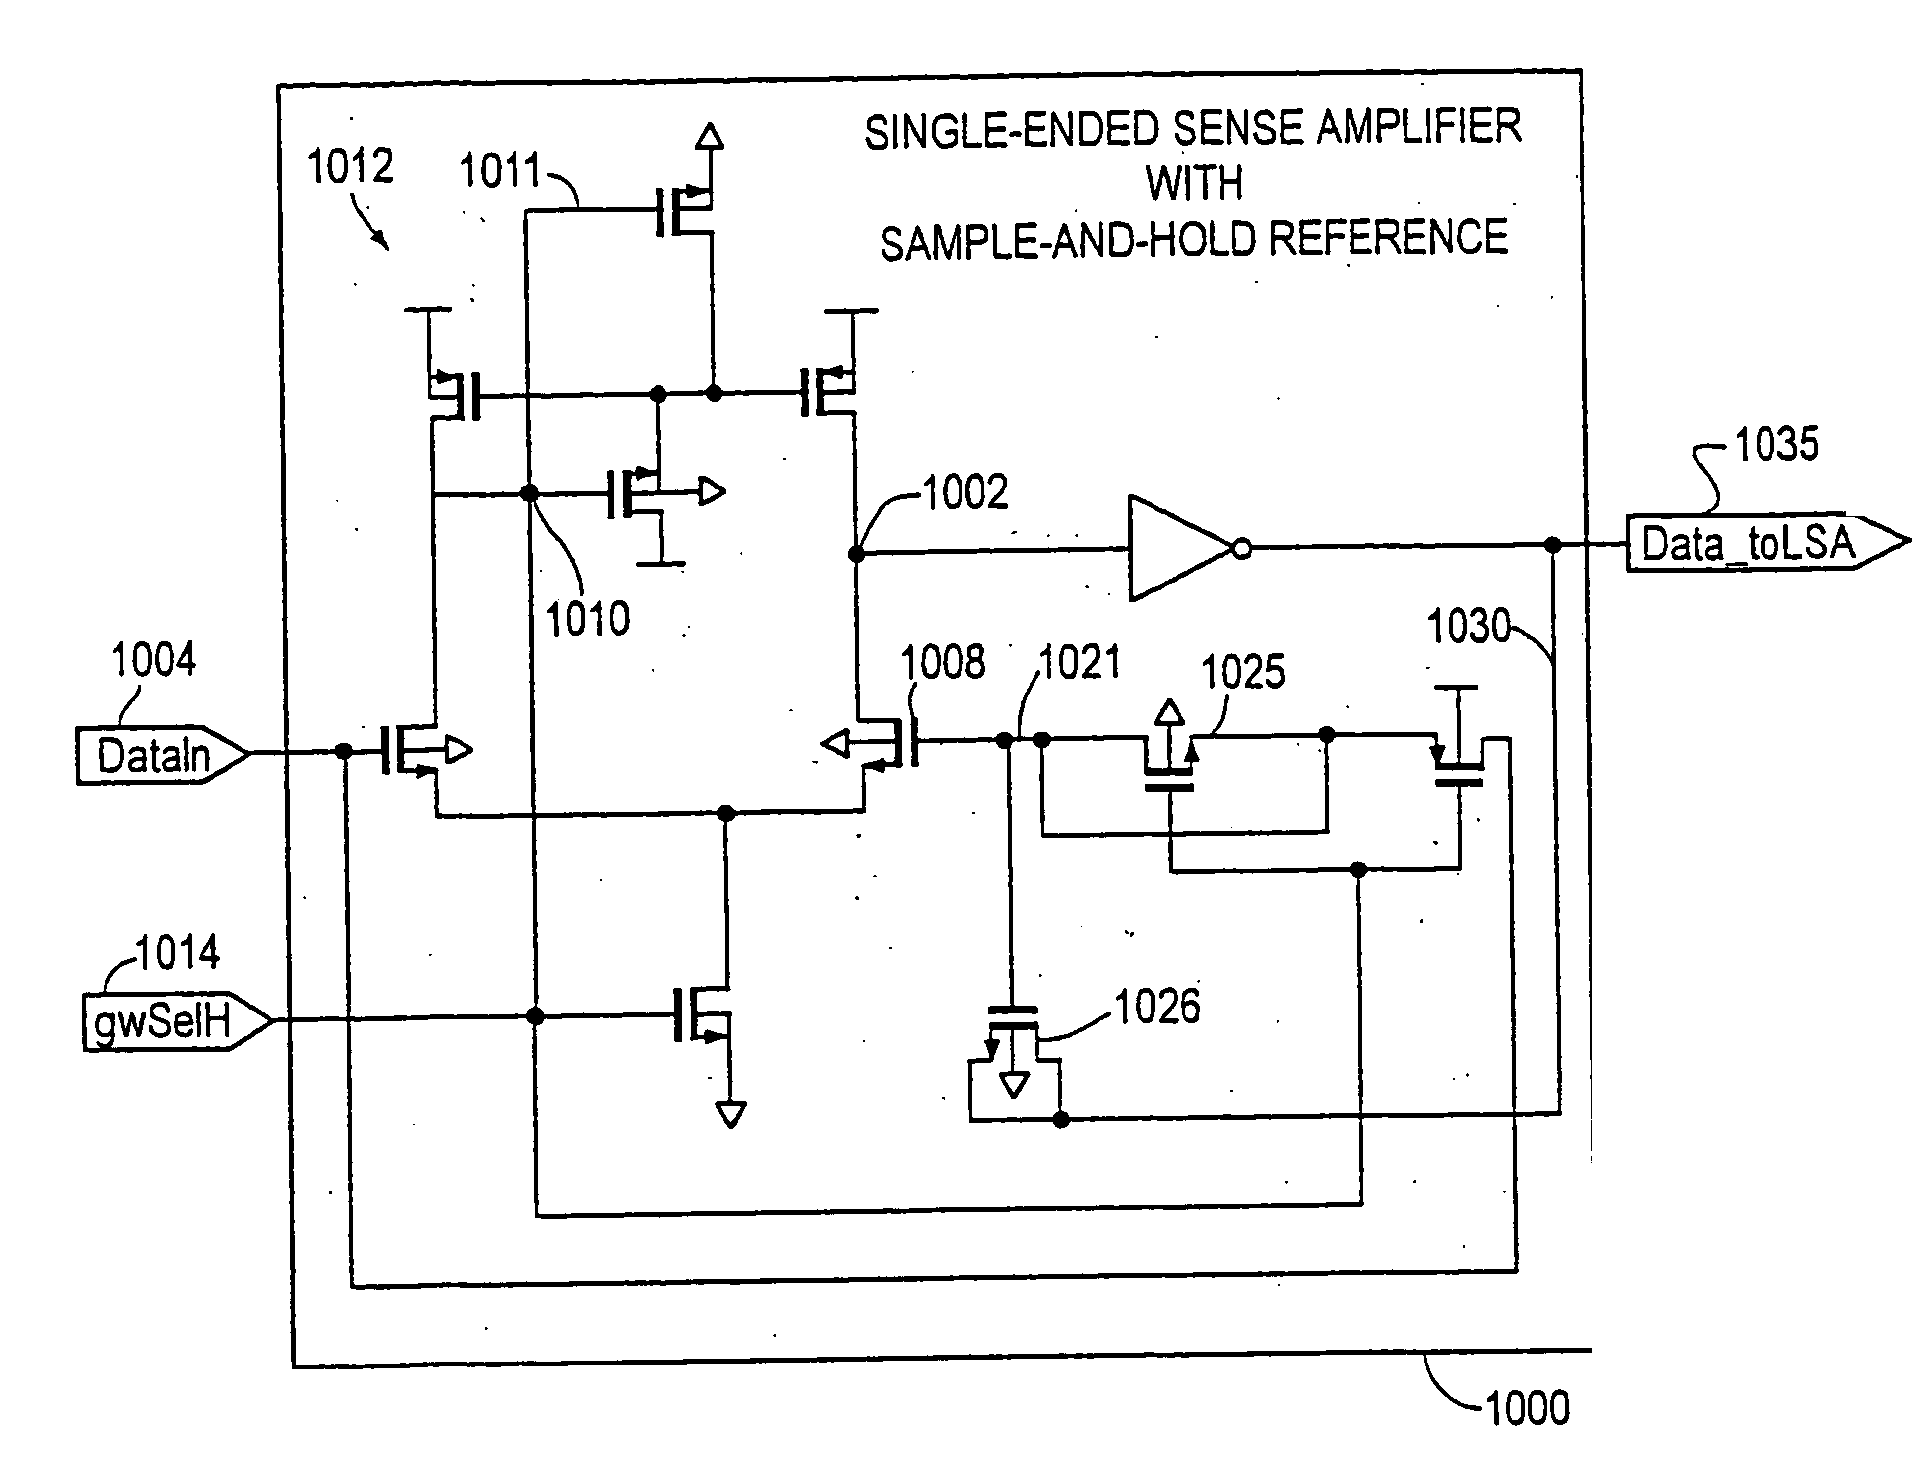 Single-ended sense amplifier with sample-and-hold reference